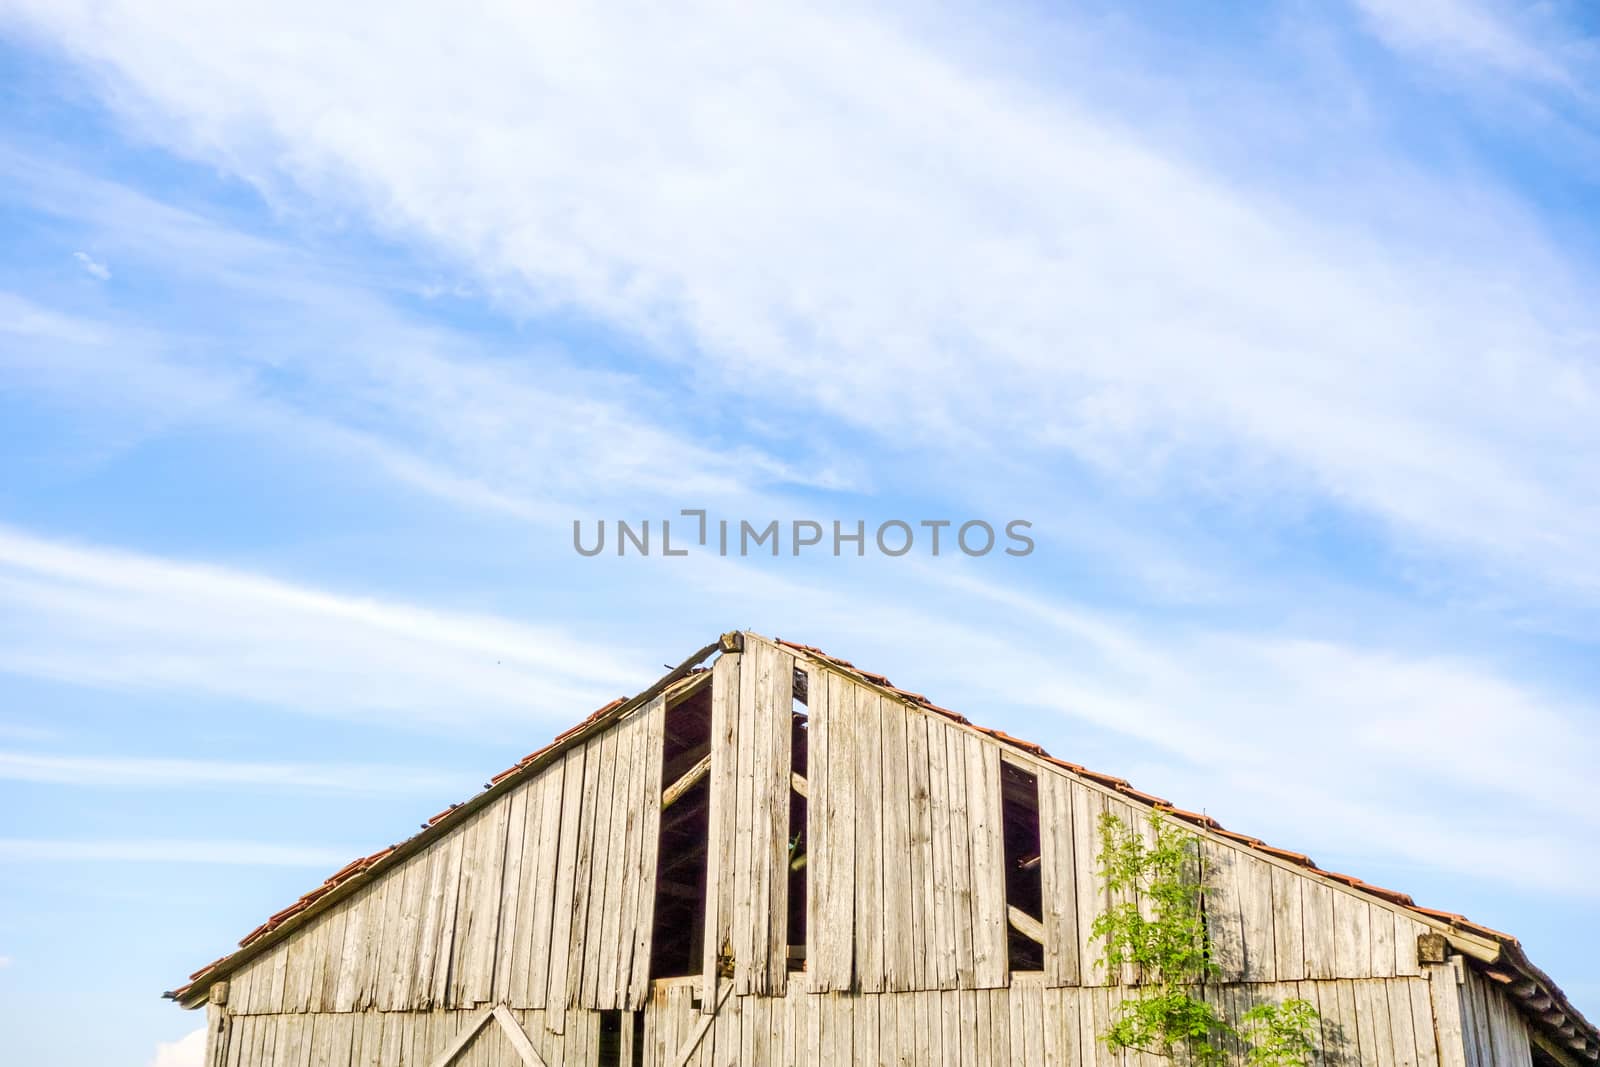 Roof of an old broken barn, blue sky with clouds